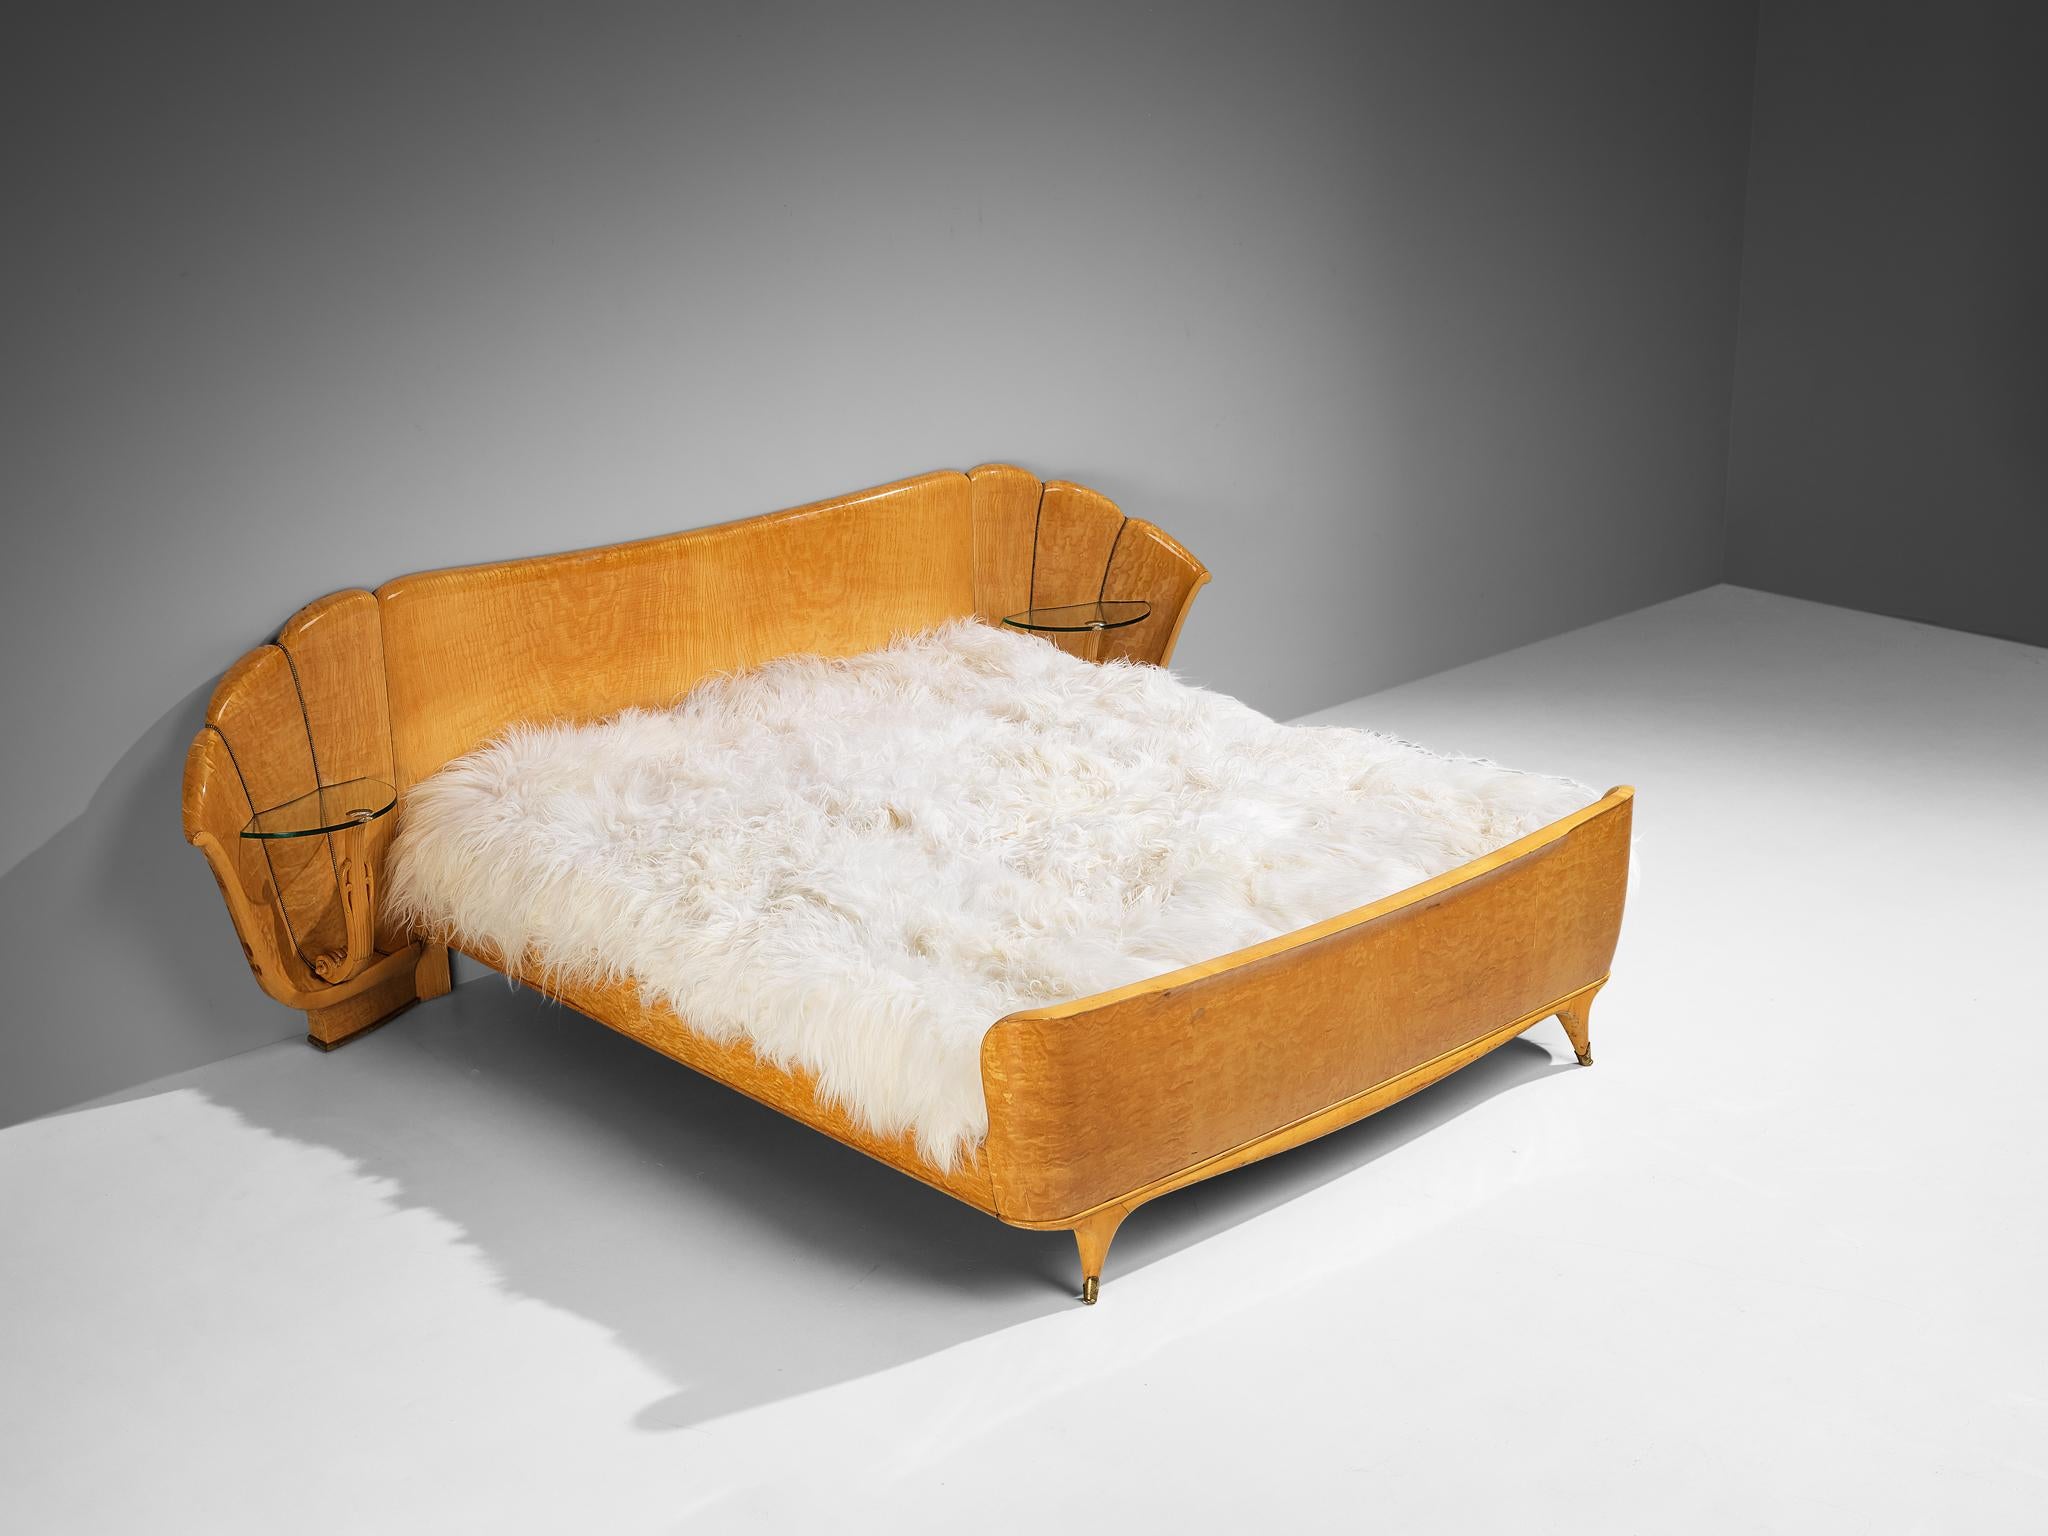 Queen bed, ash, glass, brass, Italy, 1950s

Queen bed with two integrated side tables. The shape of the headboard features a dynamic design with slightly curved sides and shell-like design. Vertical lines with little brass nails structure the